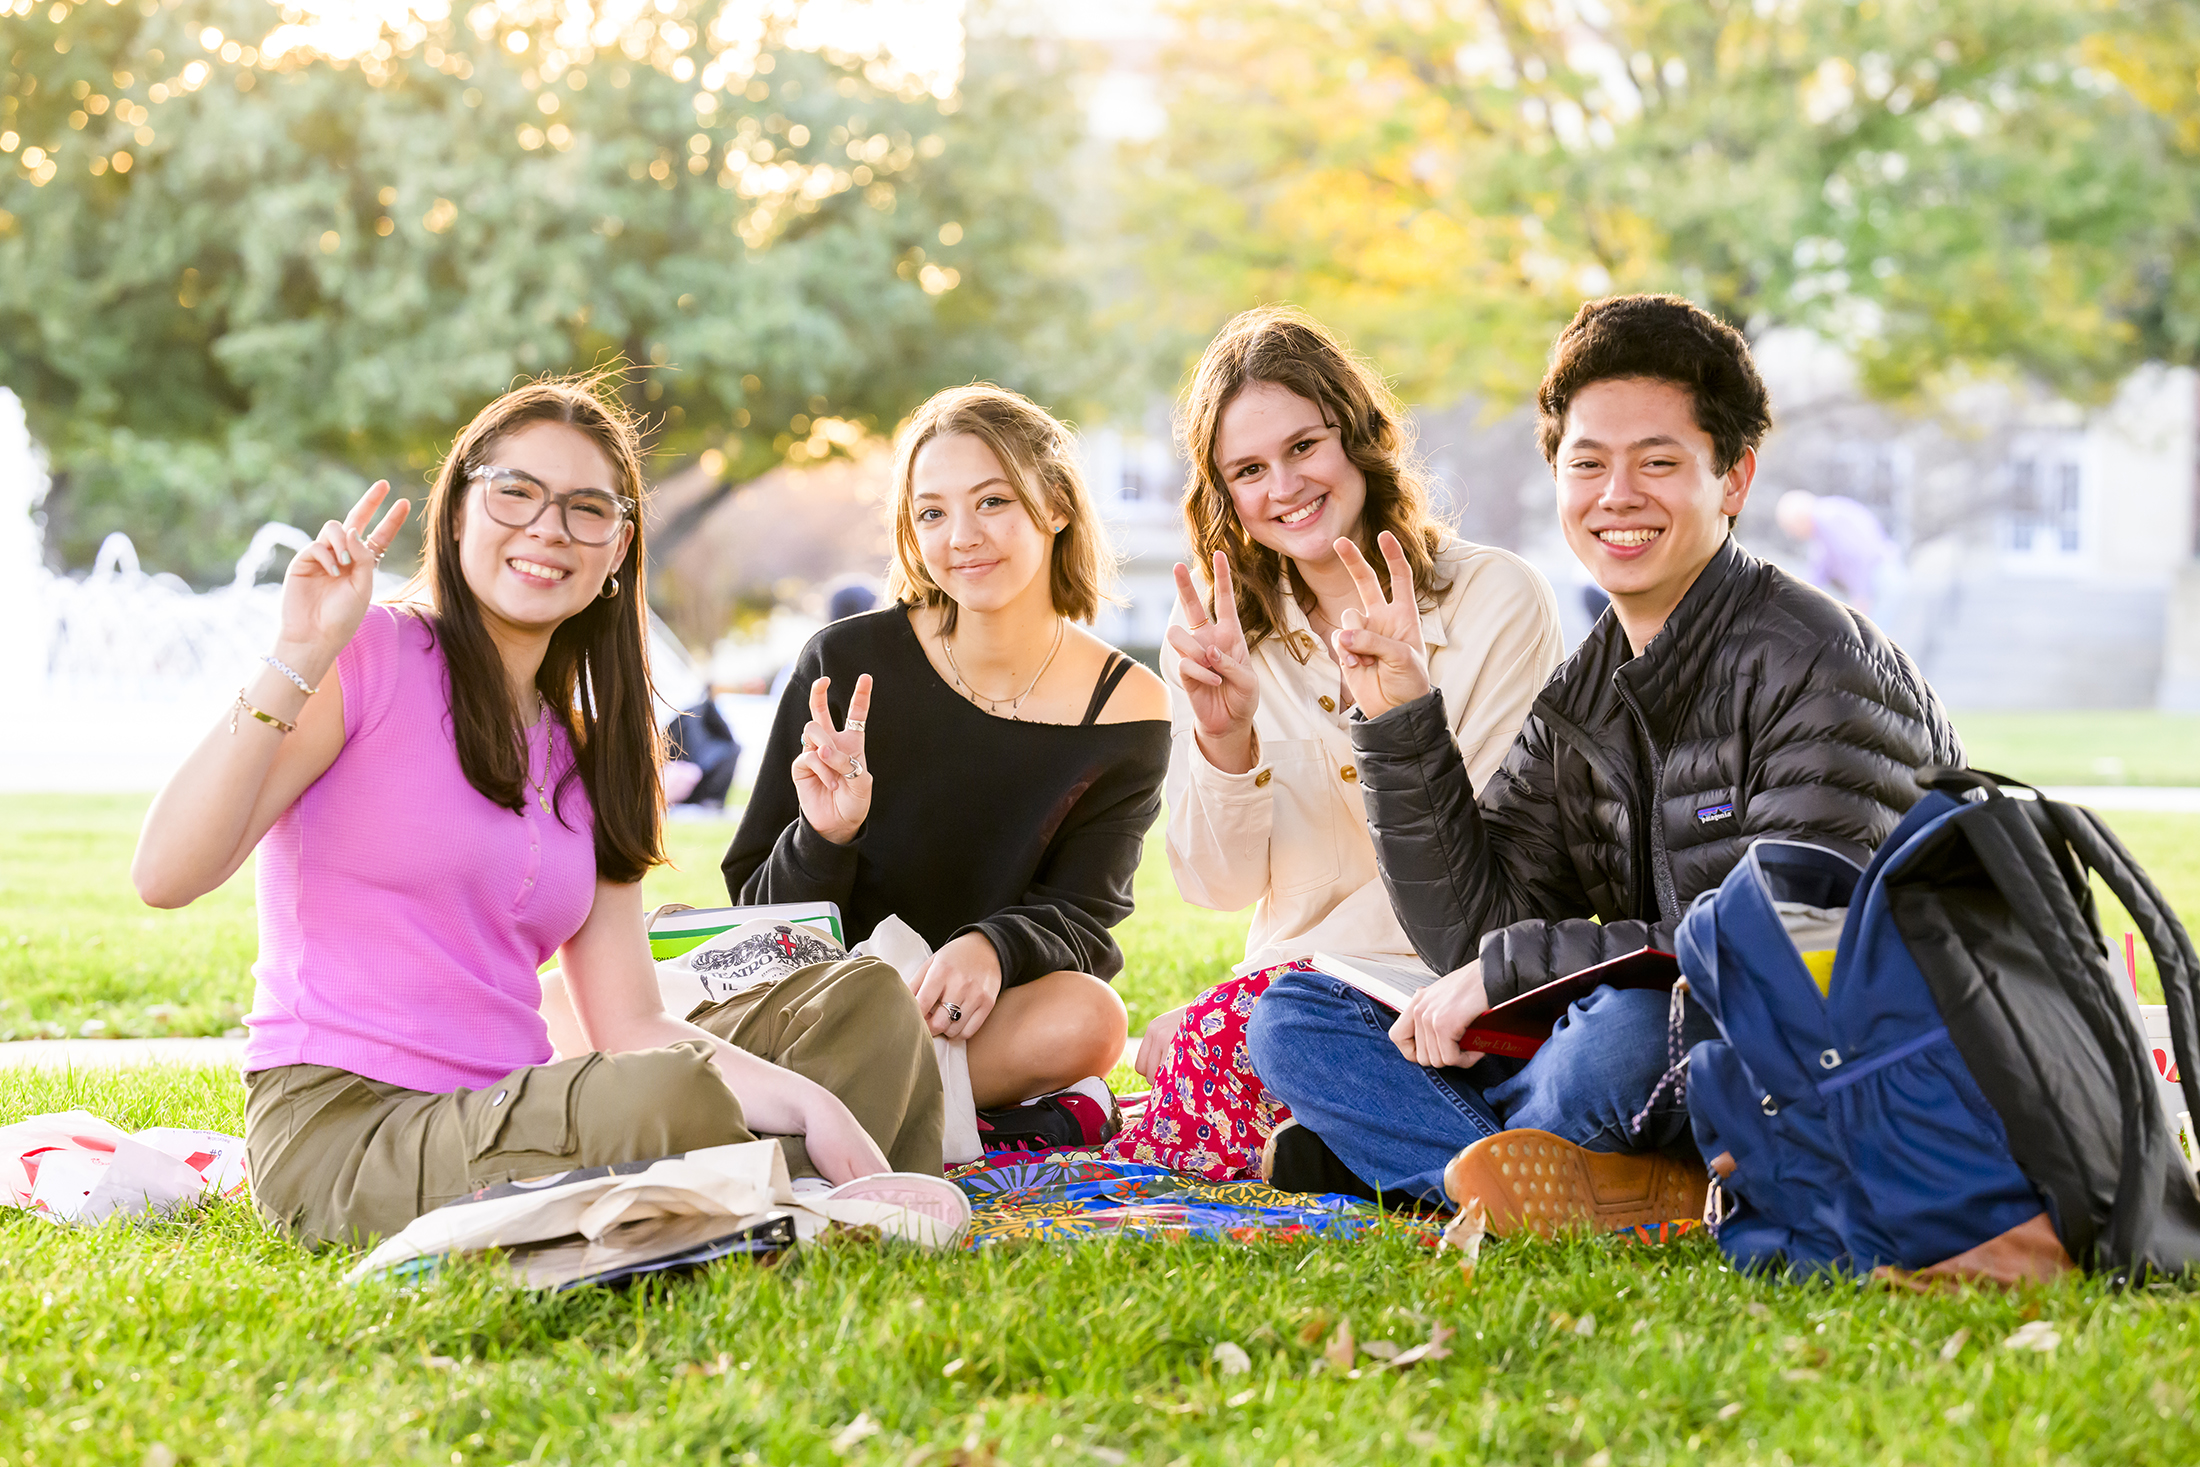 Four students are relaxing on the grass at SMU, smiling and holding up their fingers in the University's traditional "pony up" greeting.